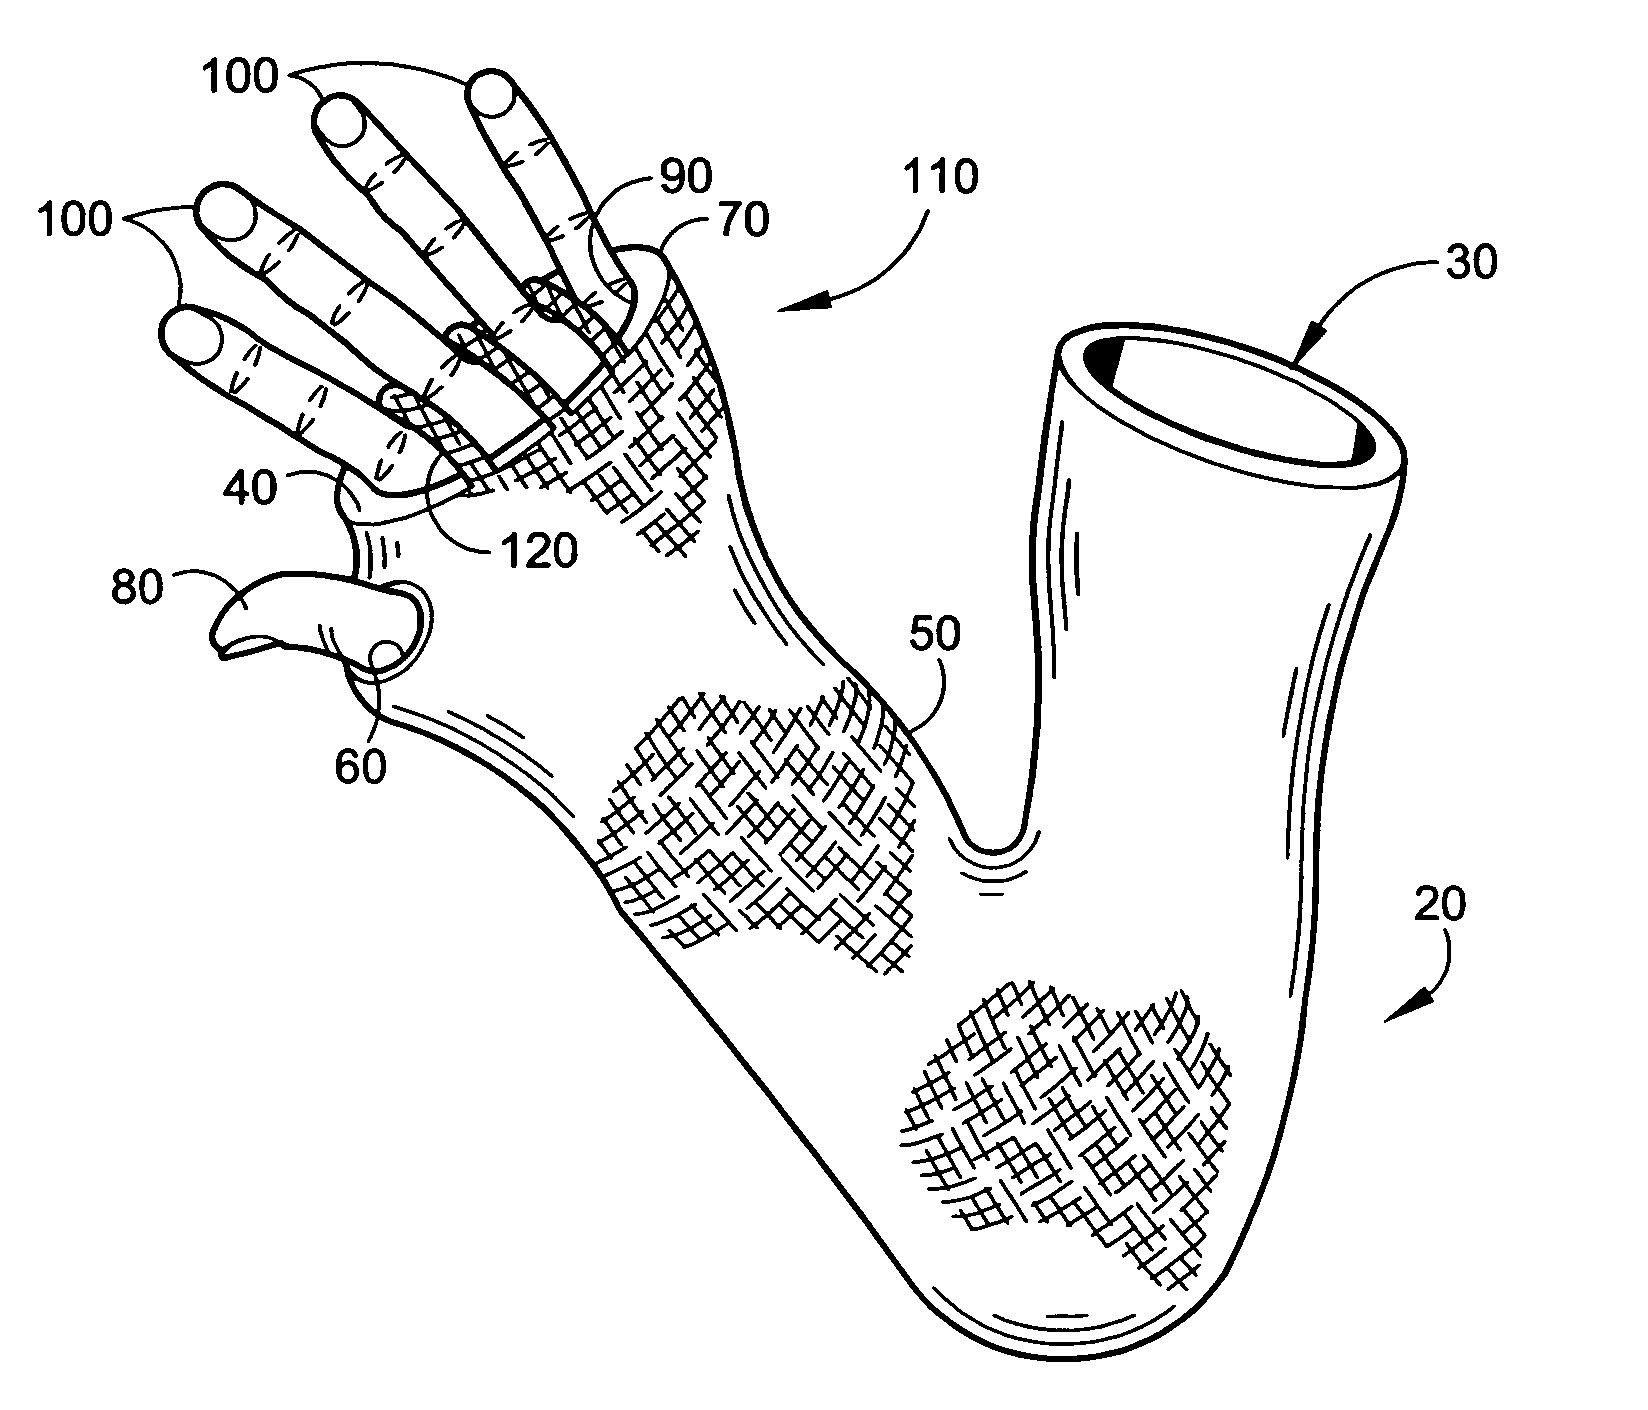 Cast cover and method of use